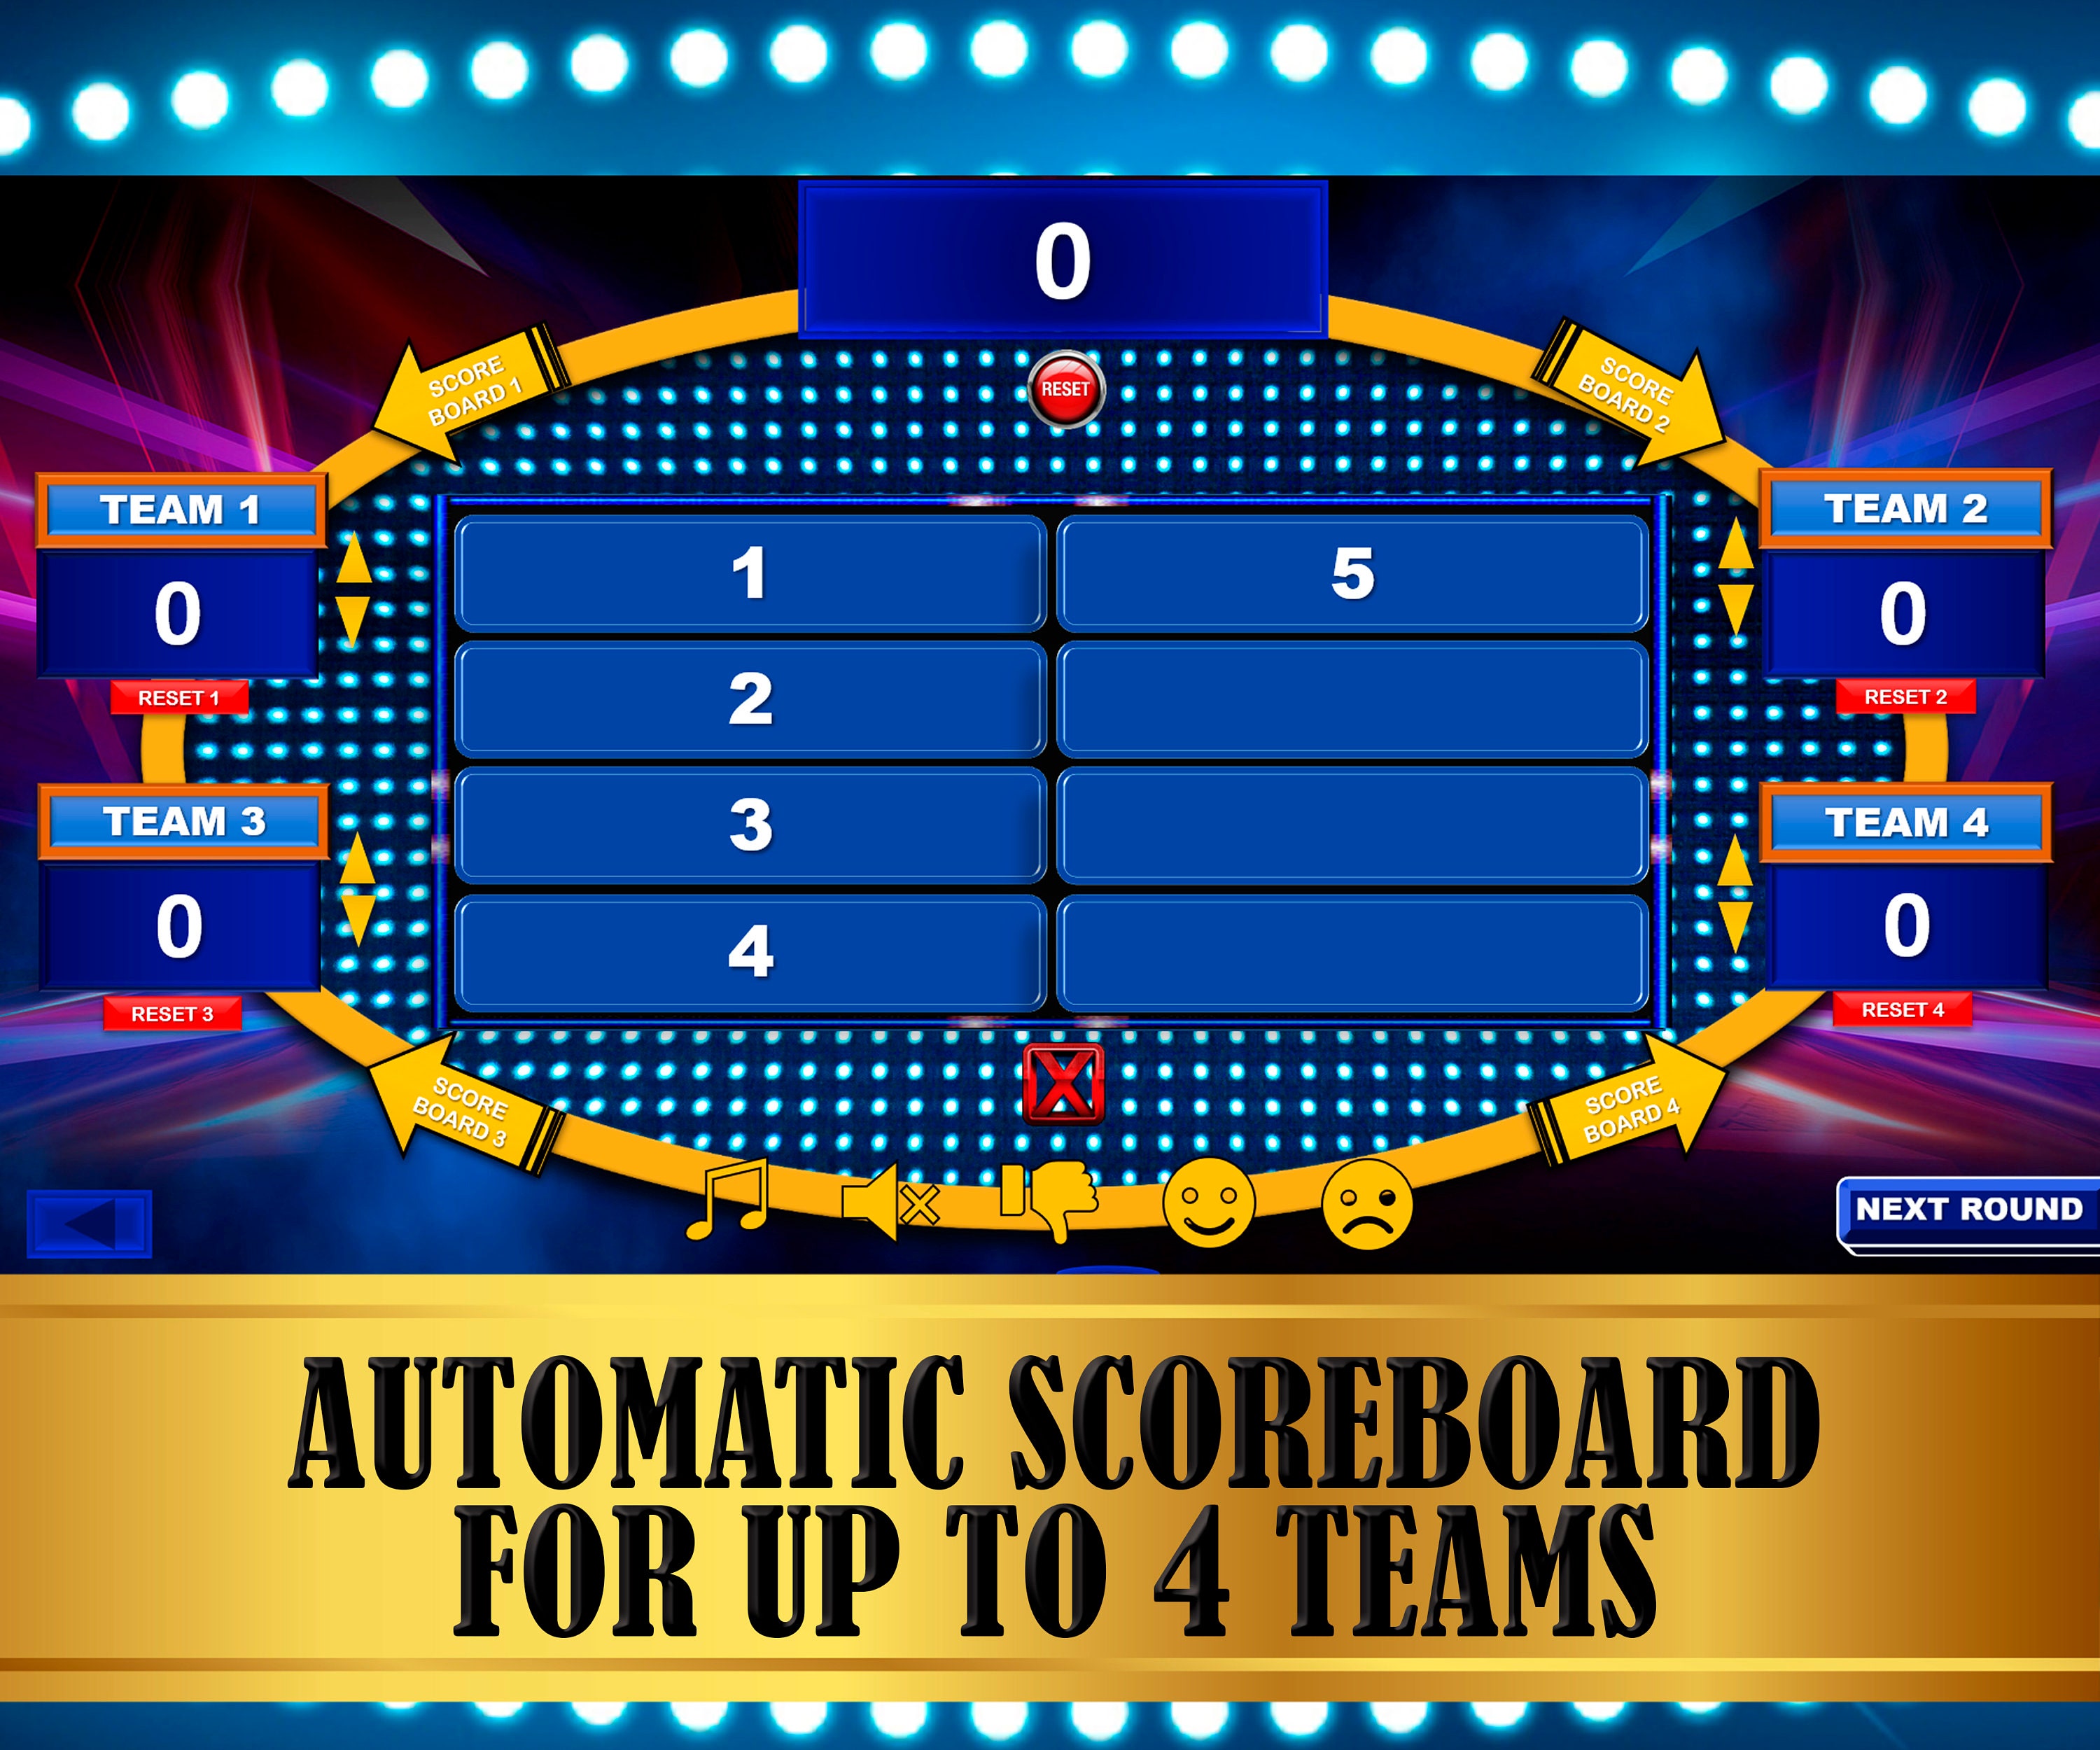 Free Christmas Family Feud PPT Template and Google Slides